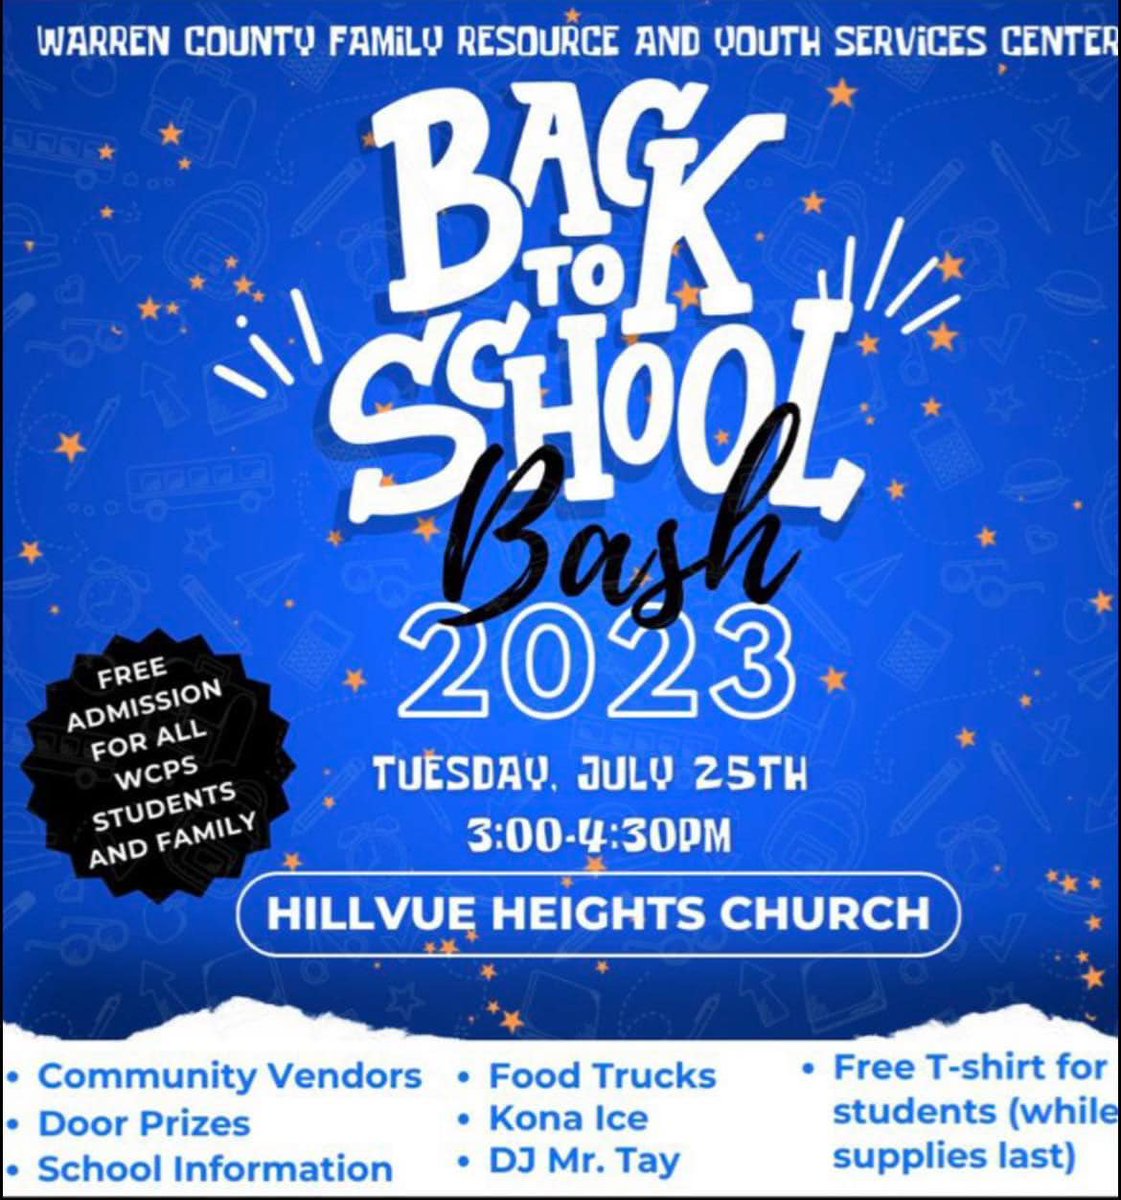 Join us for our Back to School Bash on Tuesday, July 25, 2023 from 3:00-4:30 p.m. at Hillvue Heights Church! #PreschooltoProfession #BigDistrictBigOpportunities